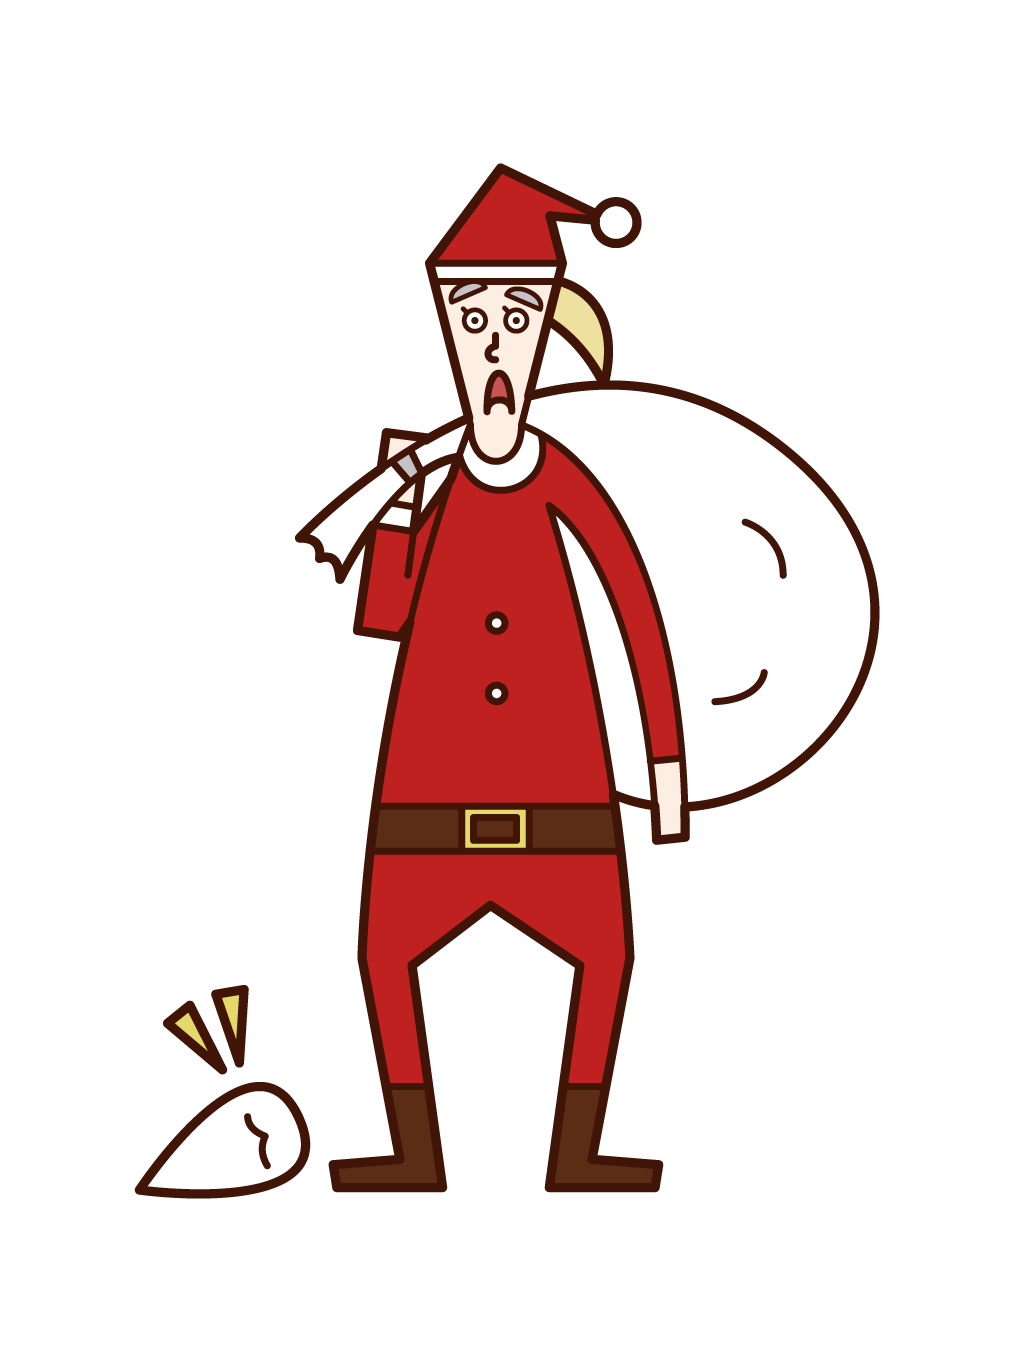 Illustration of Santa Claus (woman) who dropped the axe